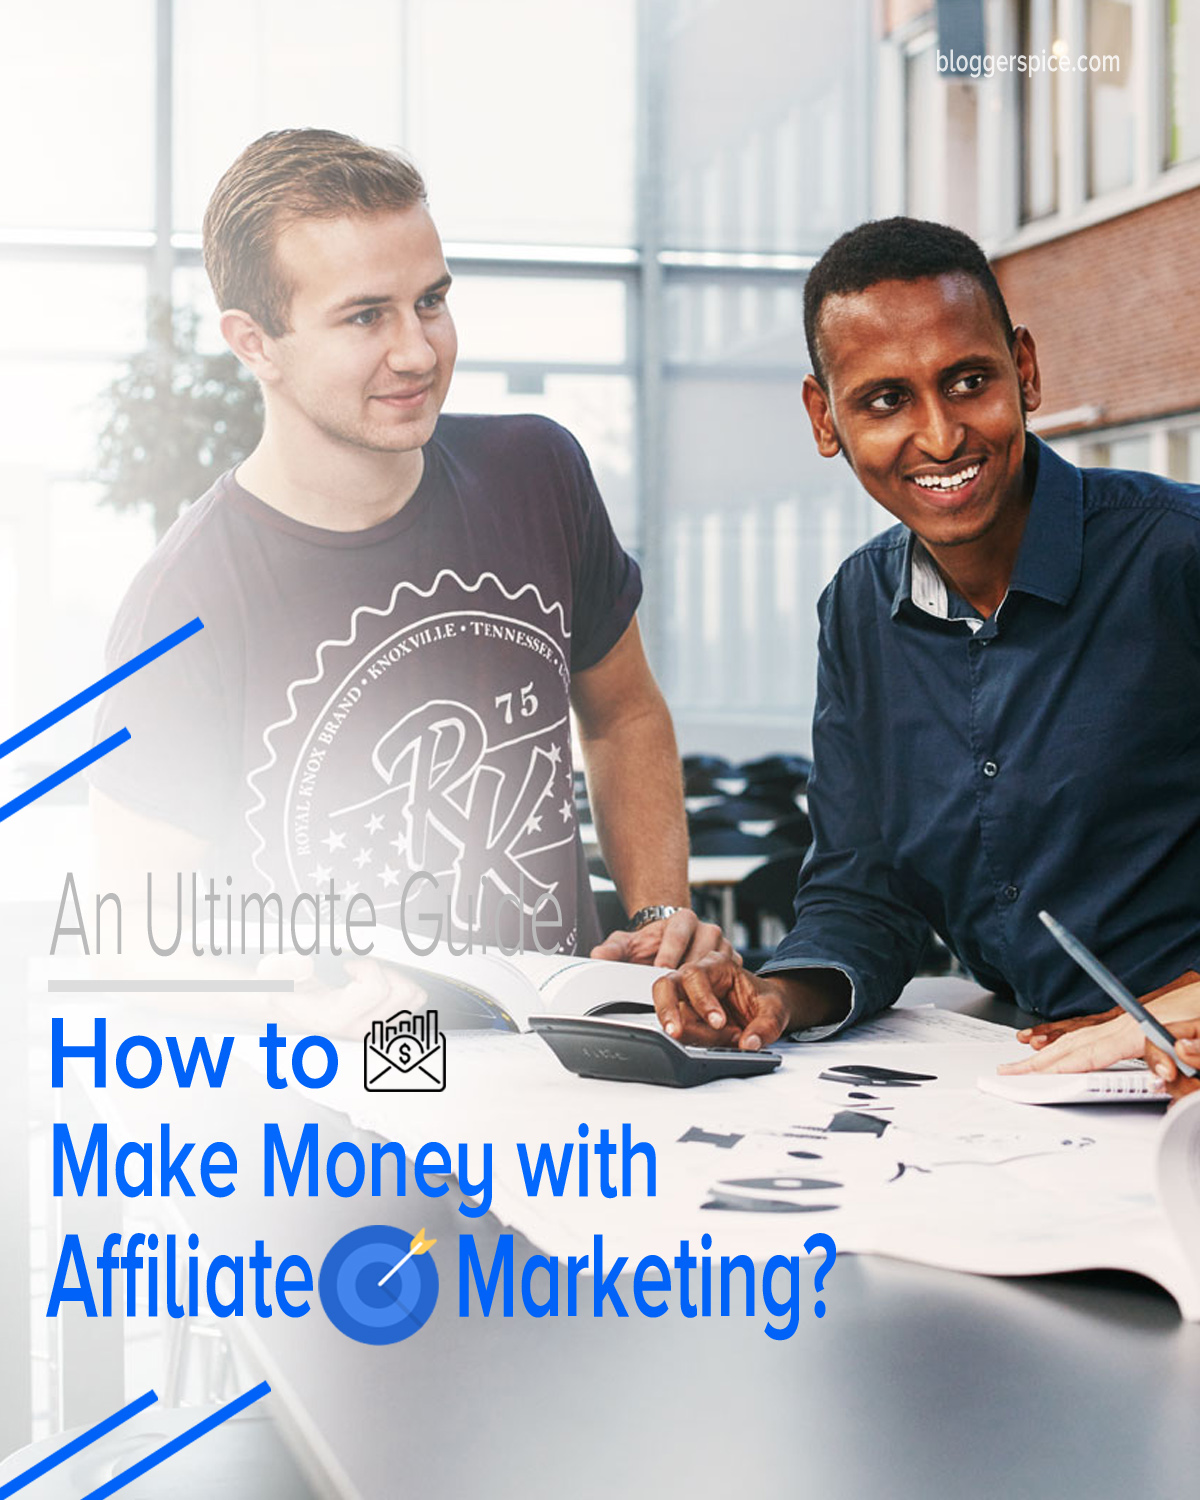 An Ultimate Guide to Make Money with Affiliate Marketing